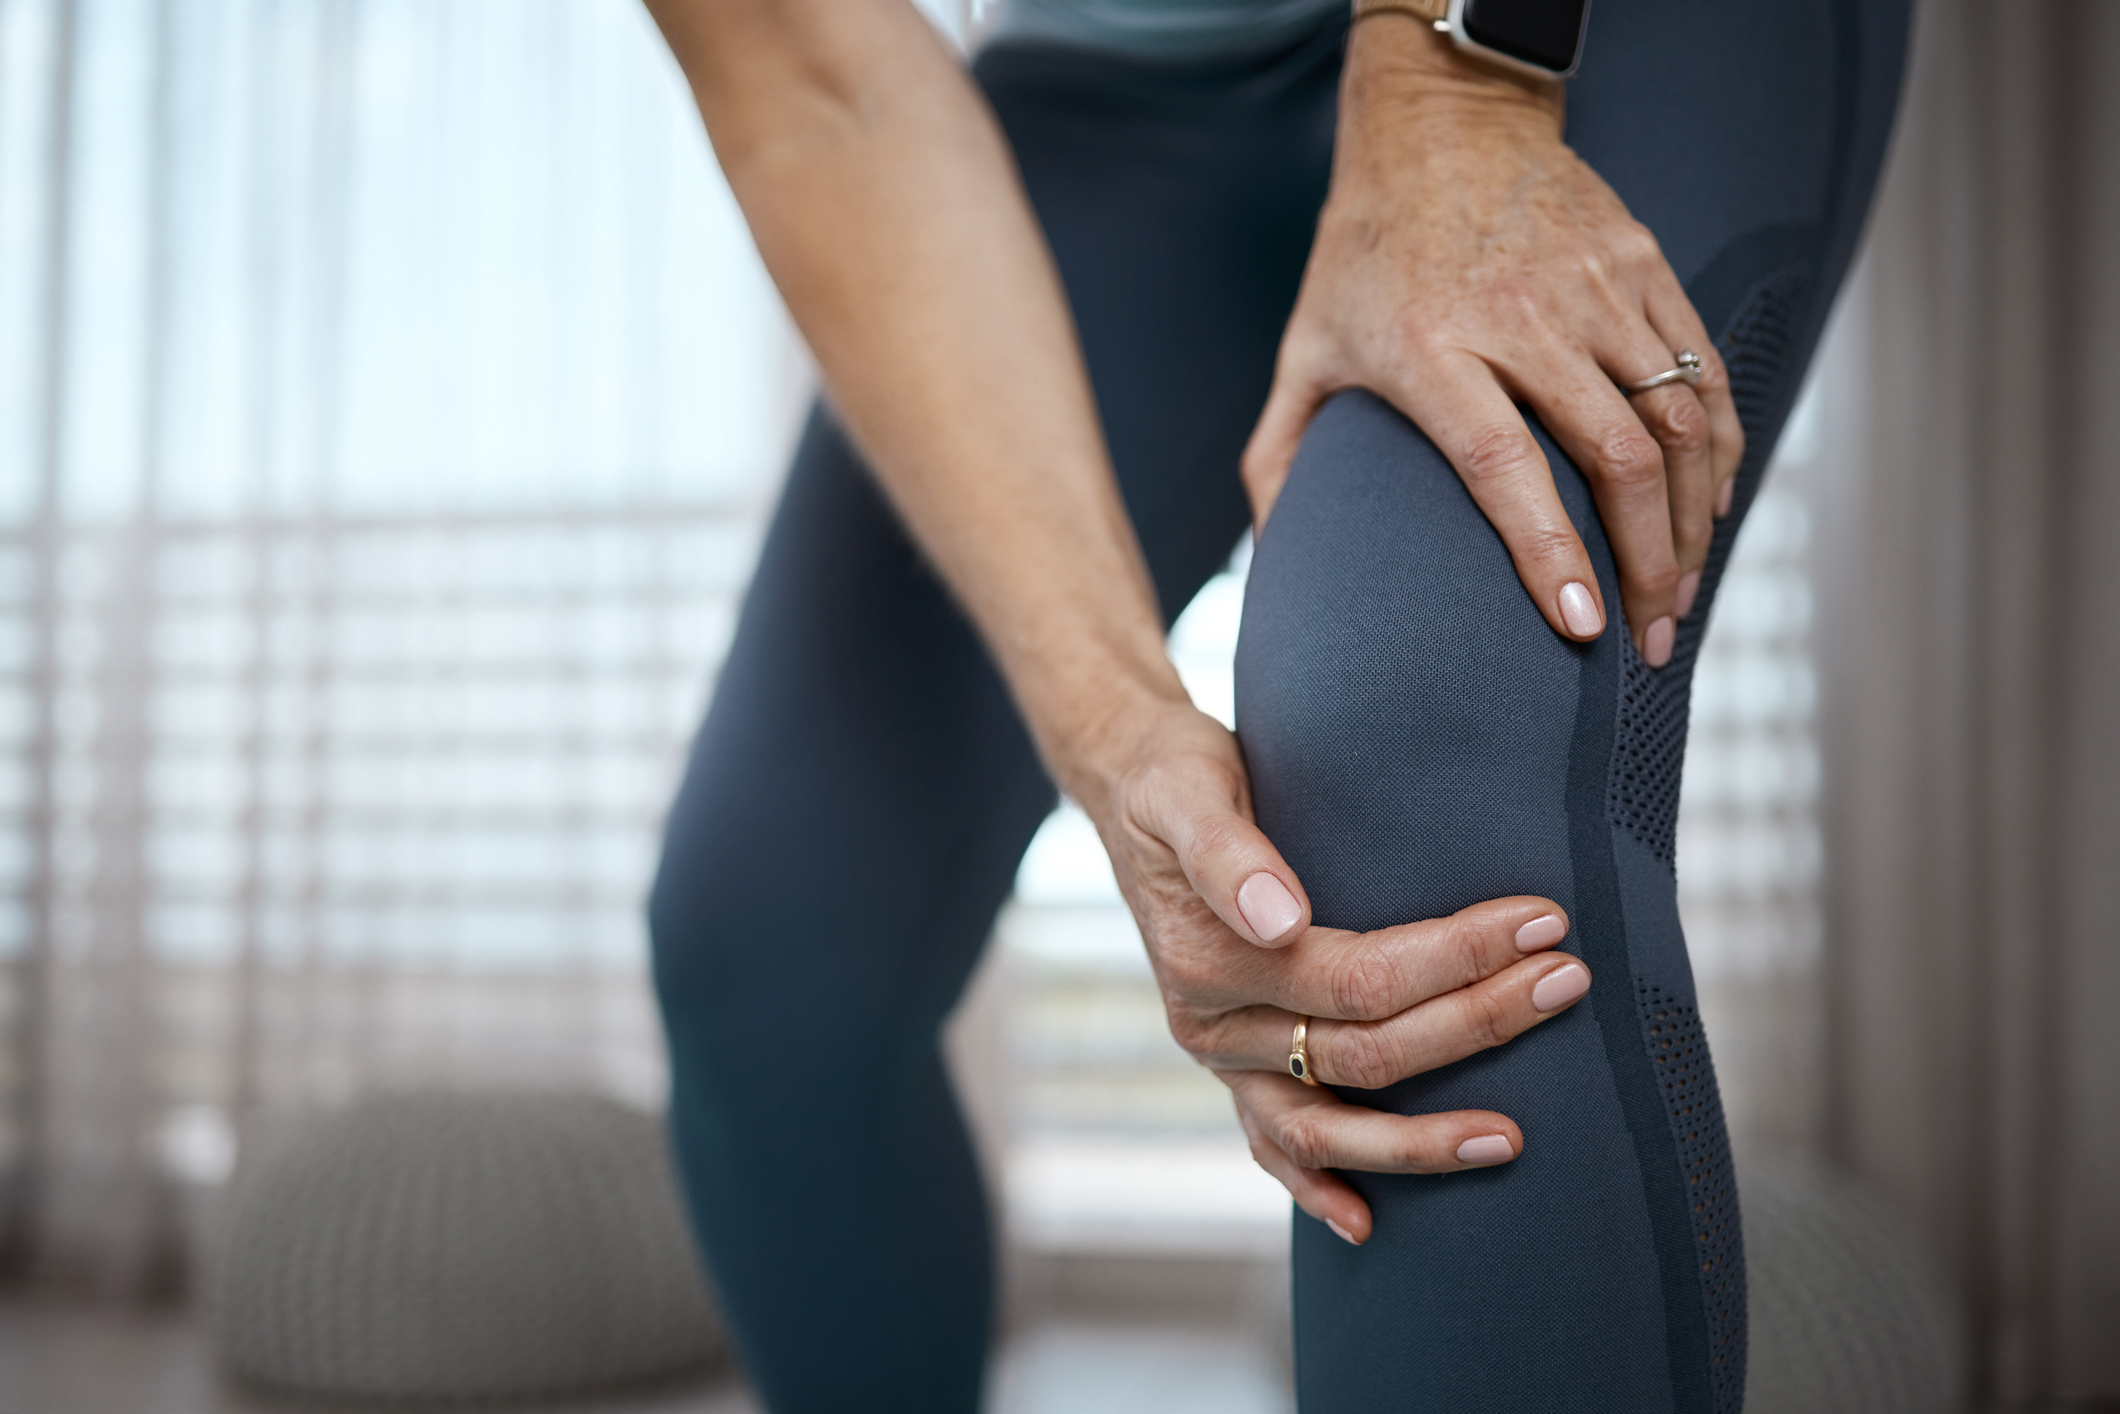 The best way to avoid knee pain says science